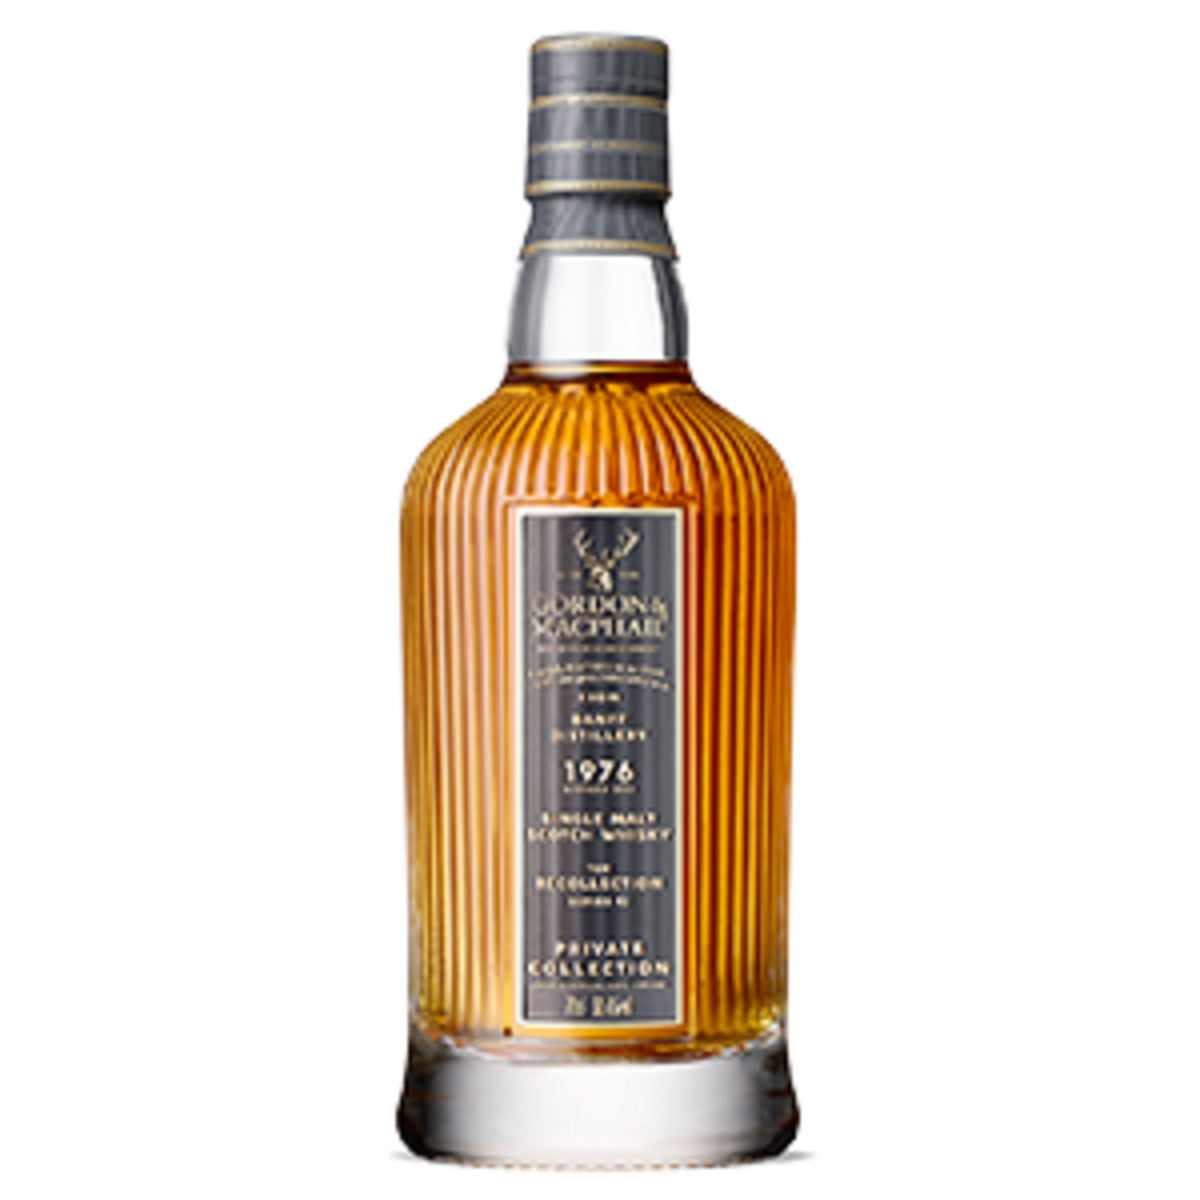 Gordon & MacPhail Private Collection The Recollection Series 46 year old Banff 1976 Review